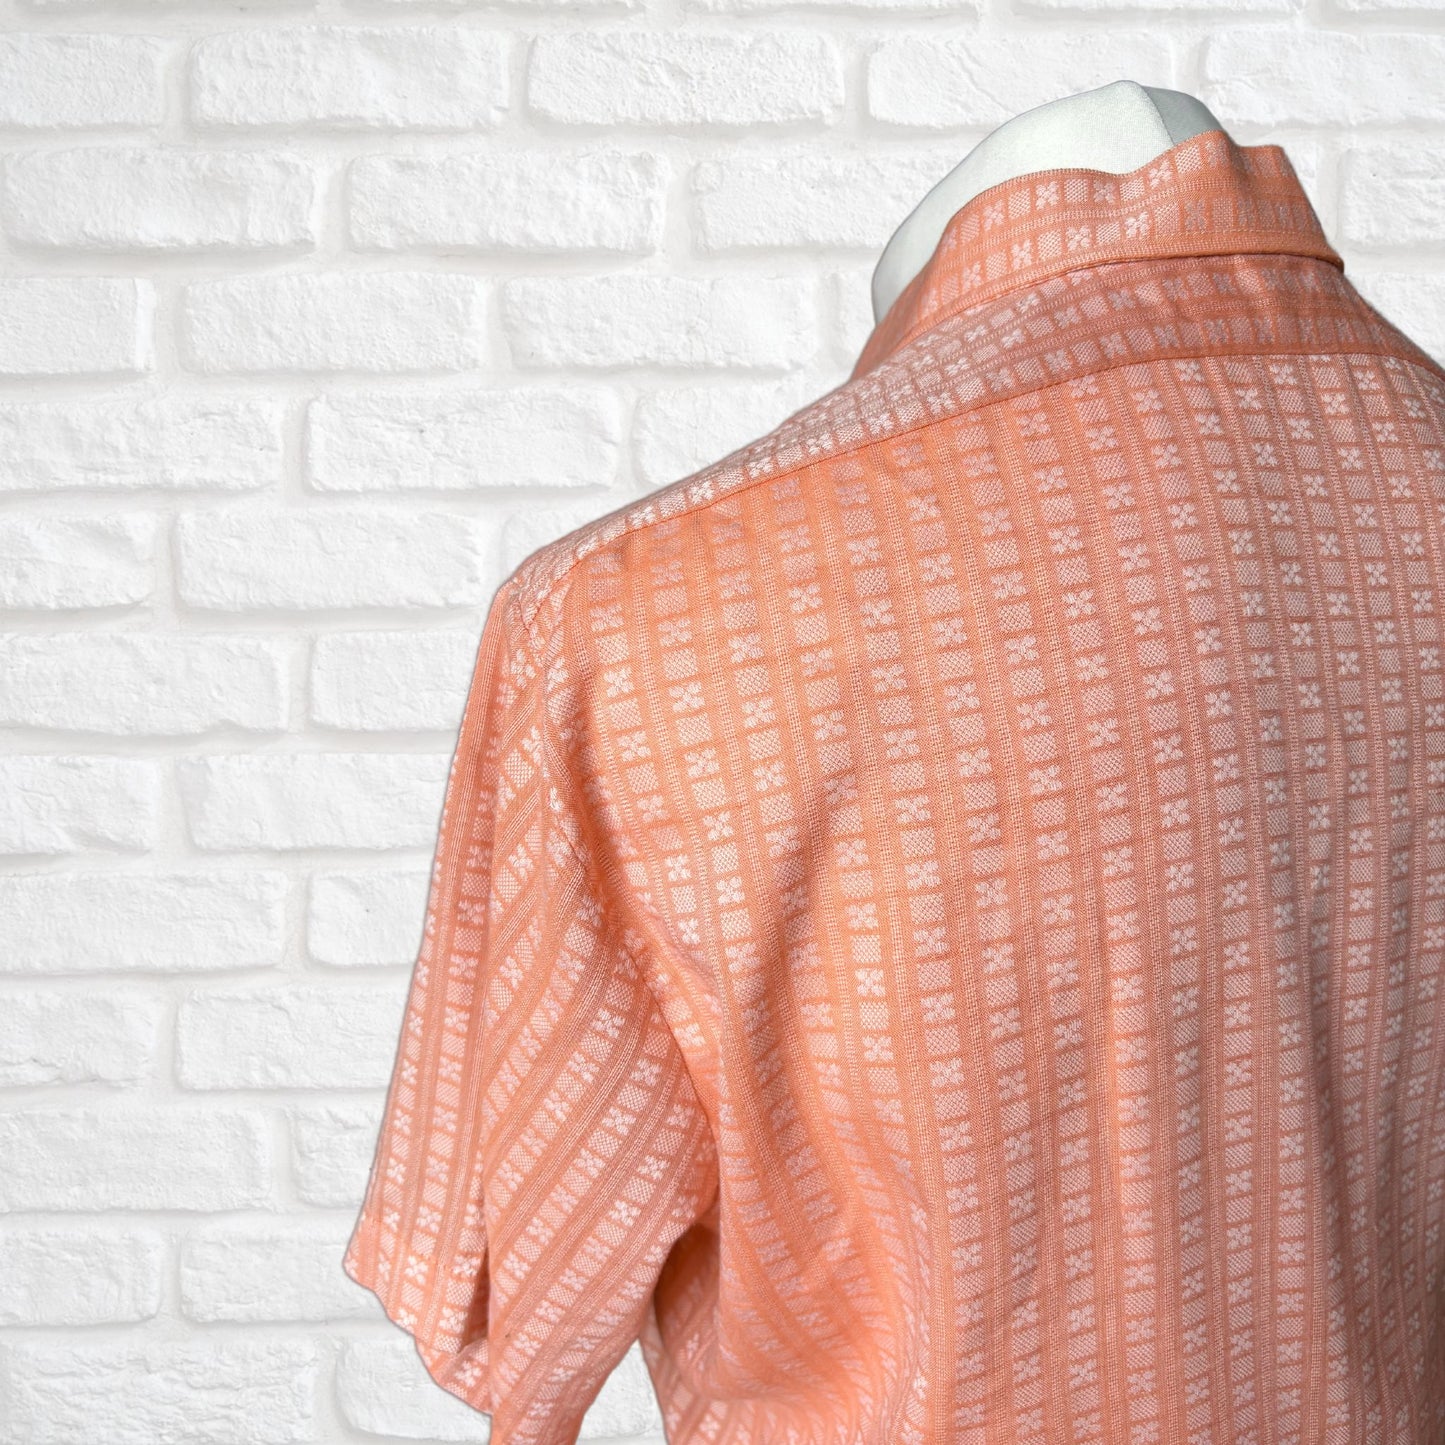 70s Vintage Peach and White Short Sleeved Shirt  - Classic Retro Style. Approx UK size L - XL (men) 18-20 (women )